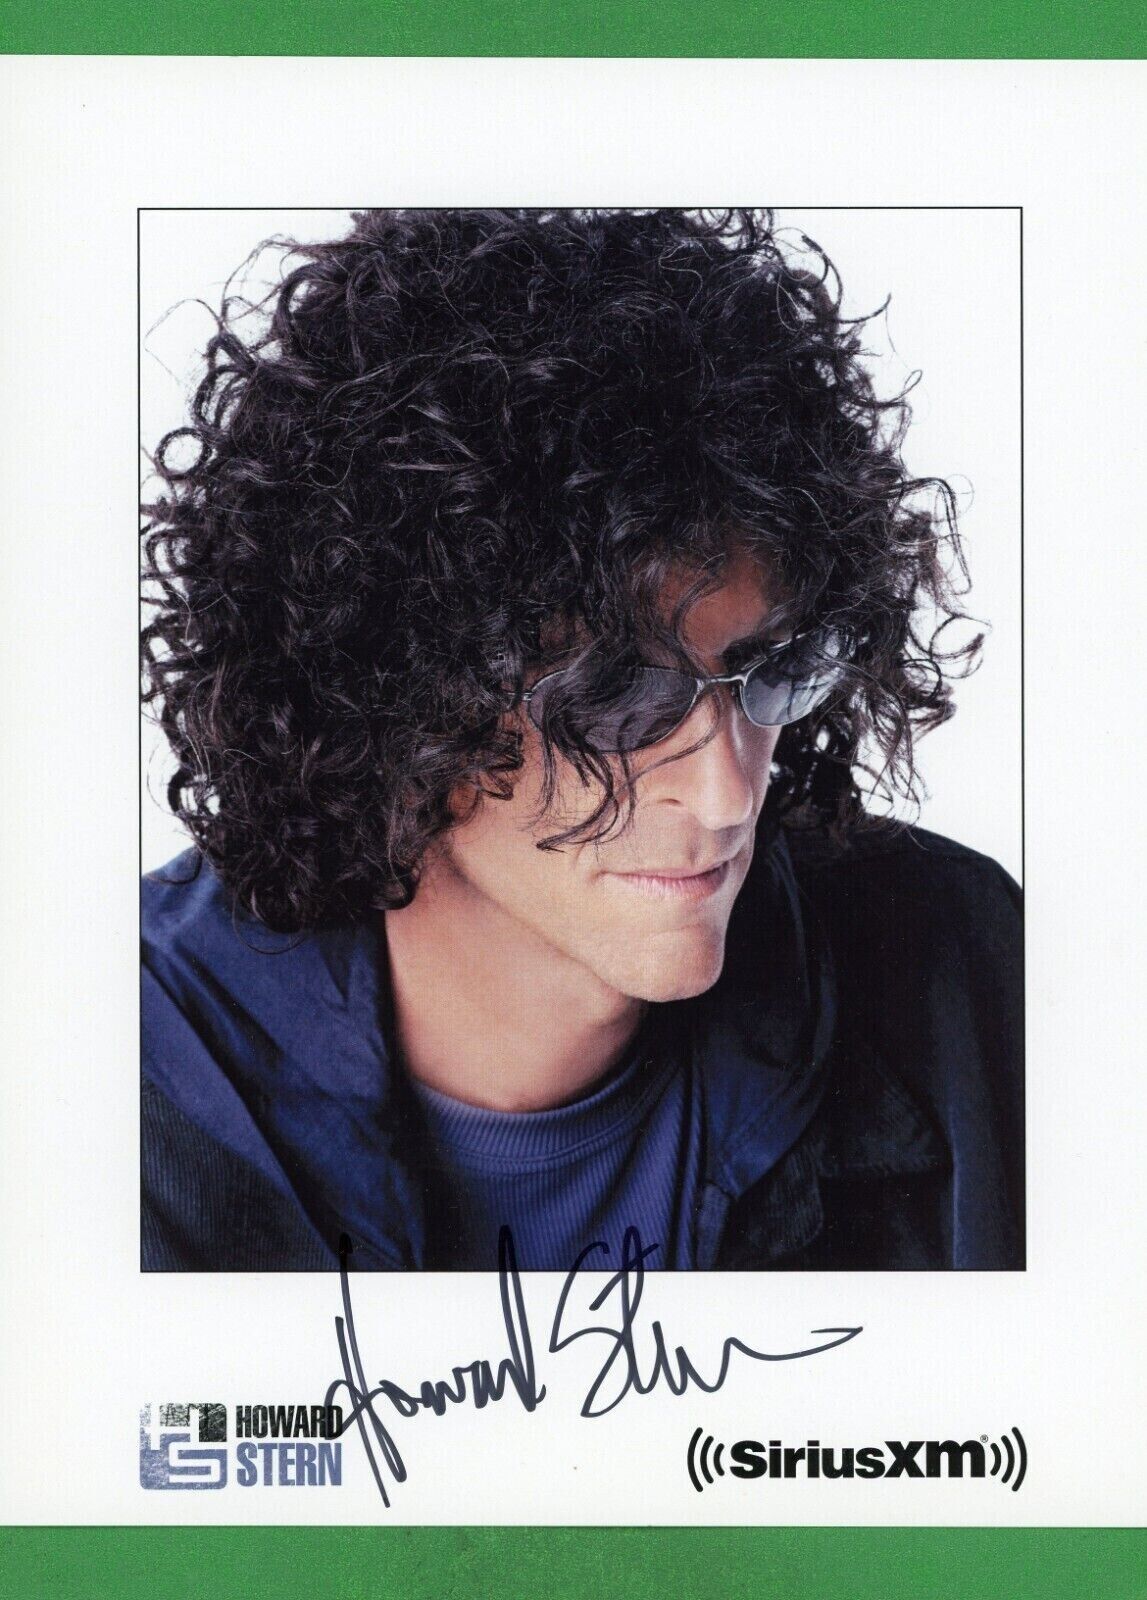 HOWARD STERN AUTOGRAPHED SIGNED 8X10 SIRIUS XM PROMO 100622